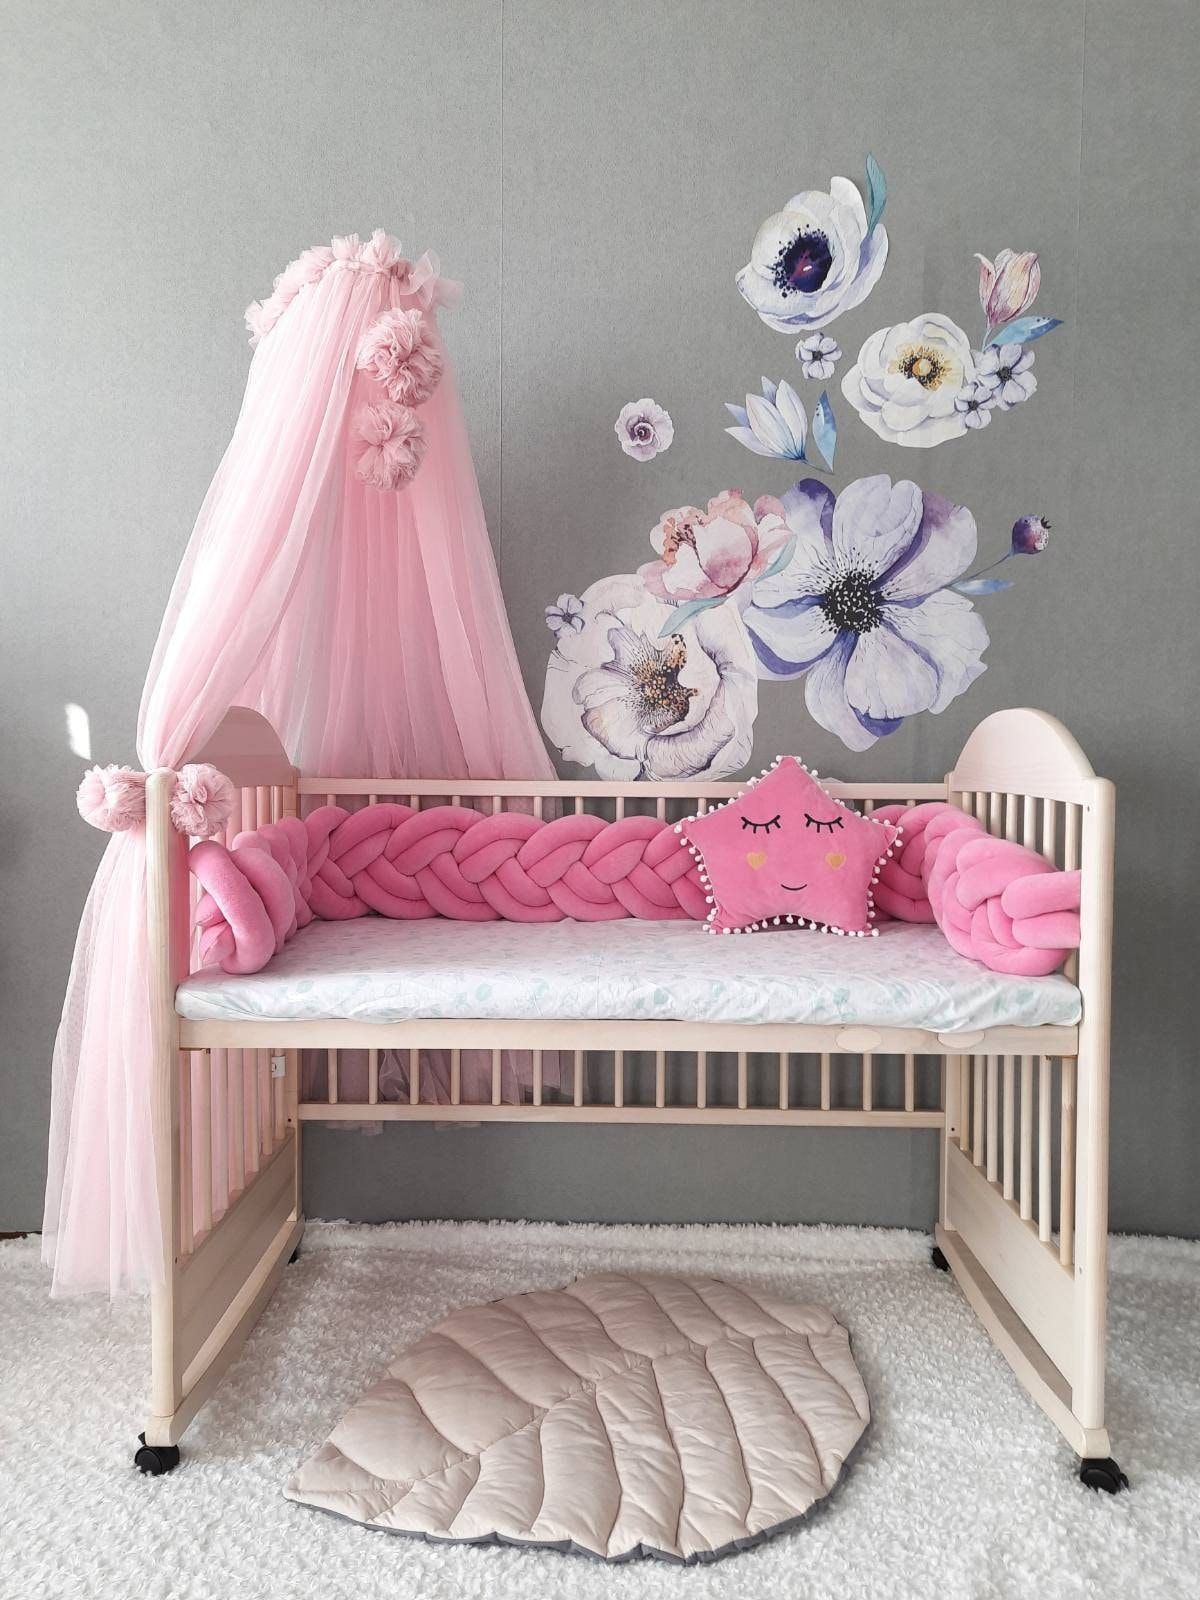 Canopy Bed tulle for nursery / girls bedroom canopy / Blush pink baldachine Princess playhouse / Pom Pom canopy +Swan pillow as a gift